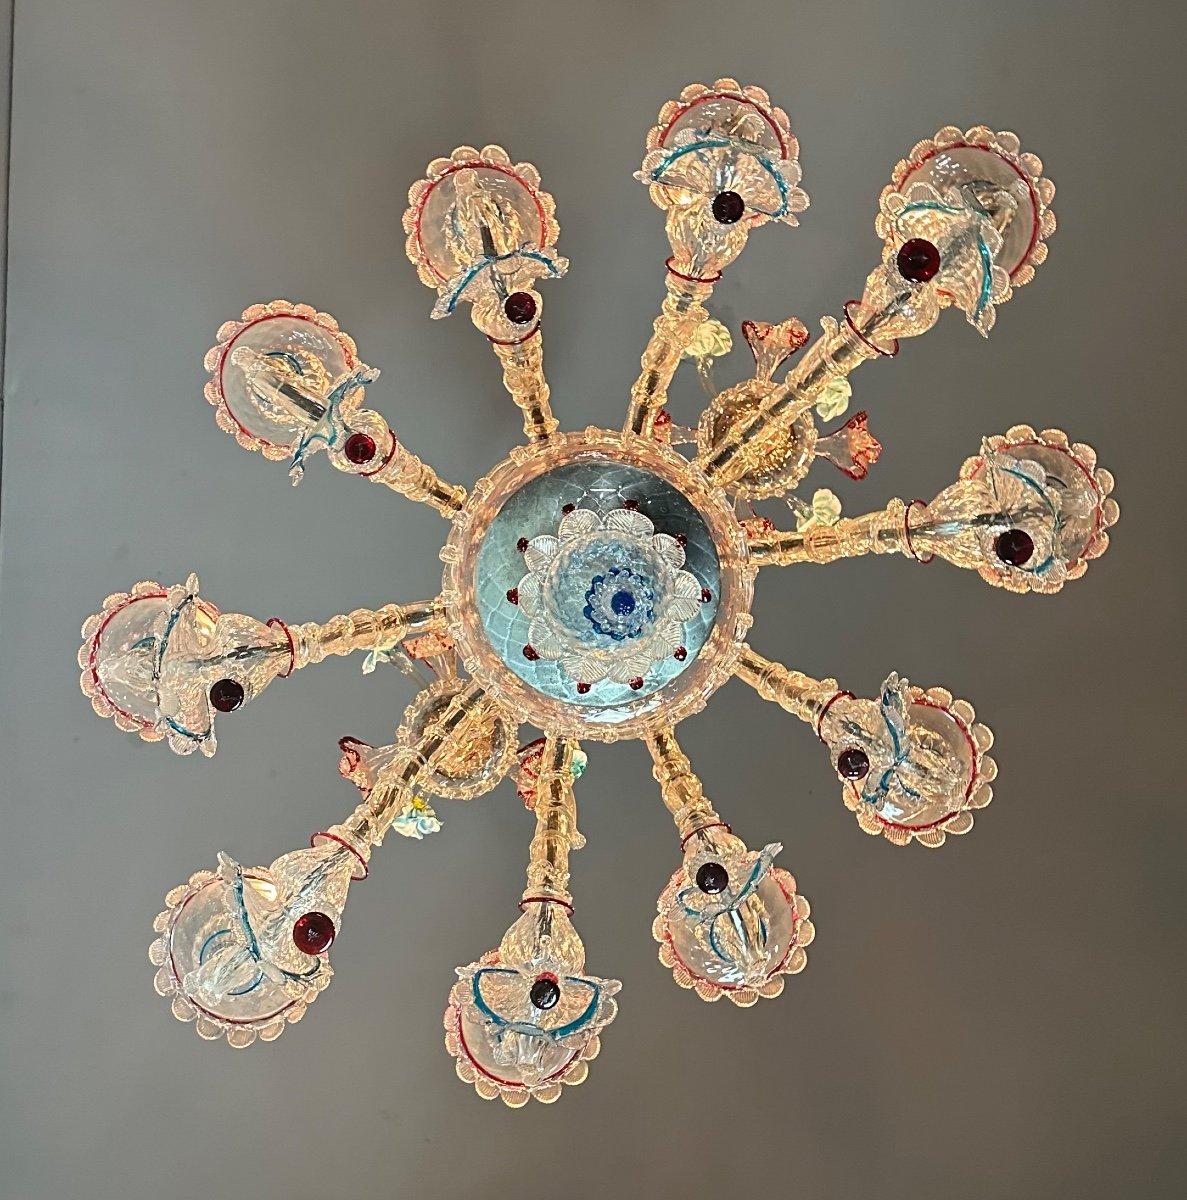 Venetian chandelier in Murano glass, new electrification of 12 sconces on two levels